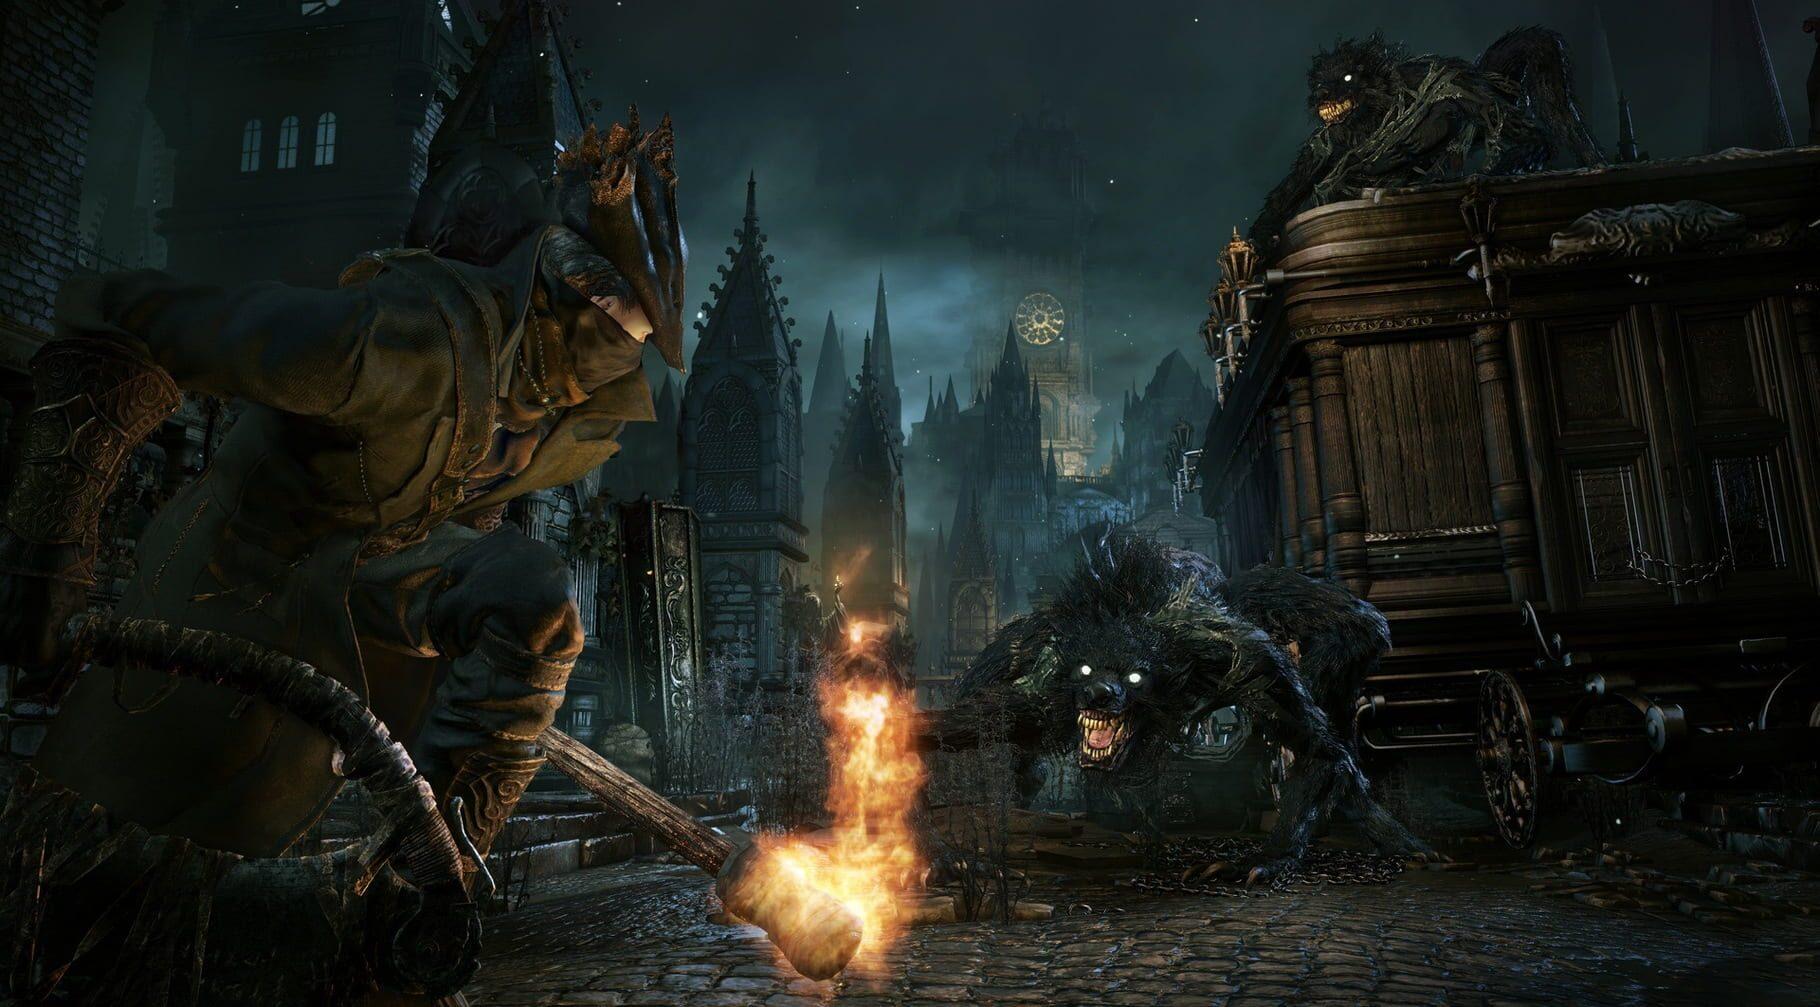 Can you play Bloodborne on cloud gaming services?